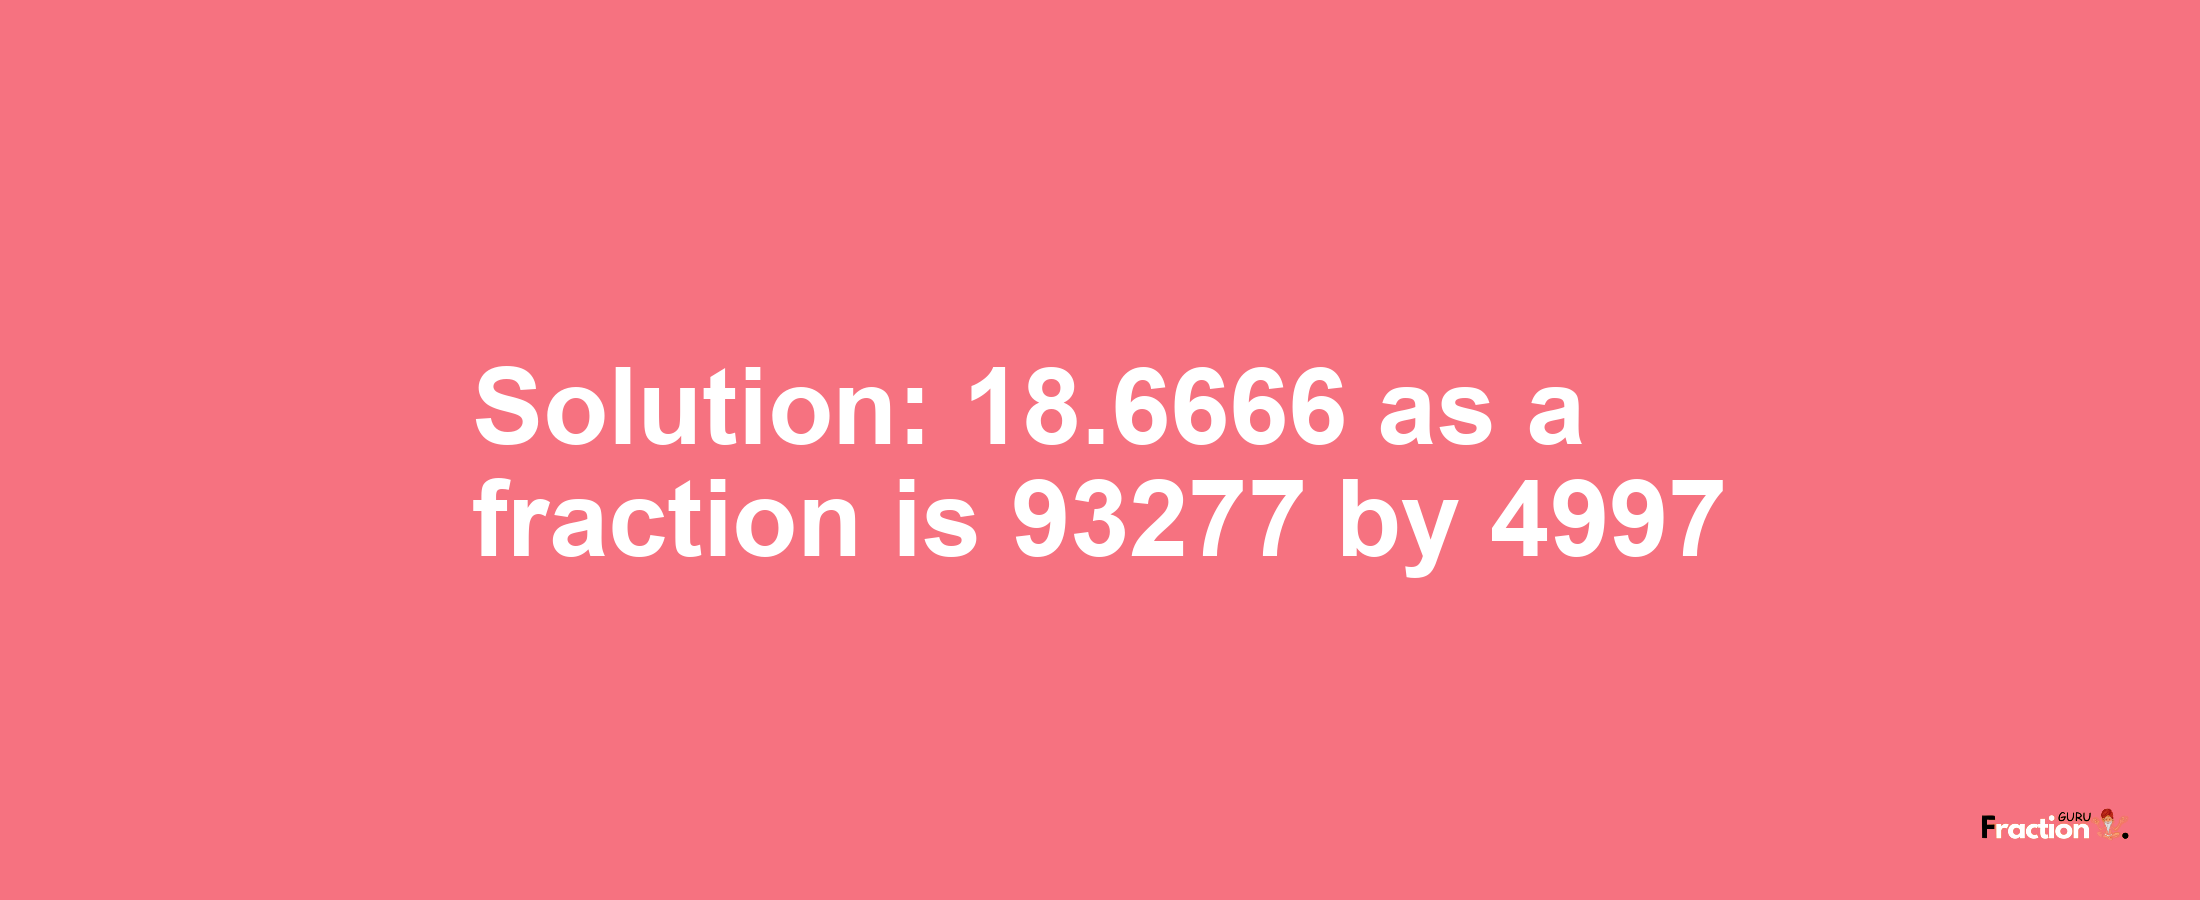 Solution:18.6666 as a fraction is 93277/4997